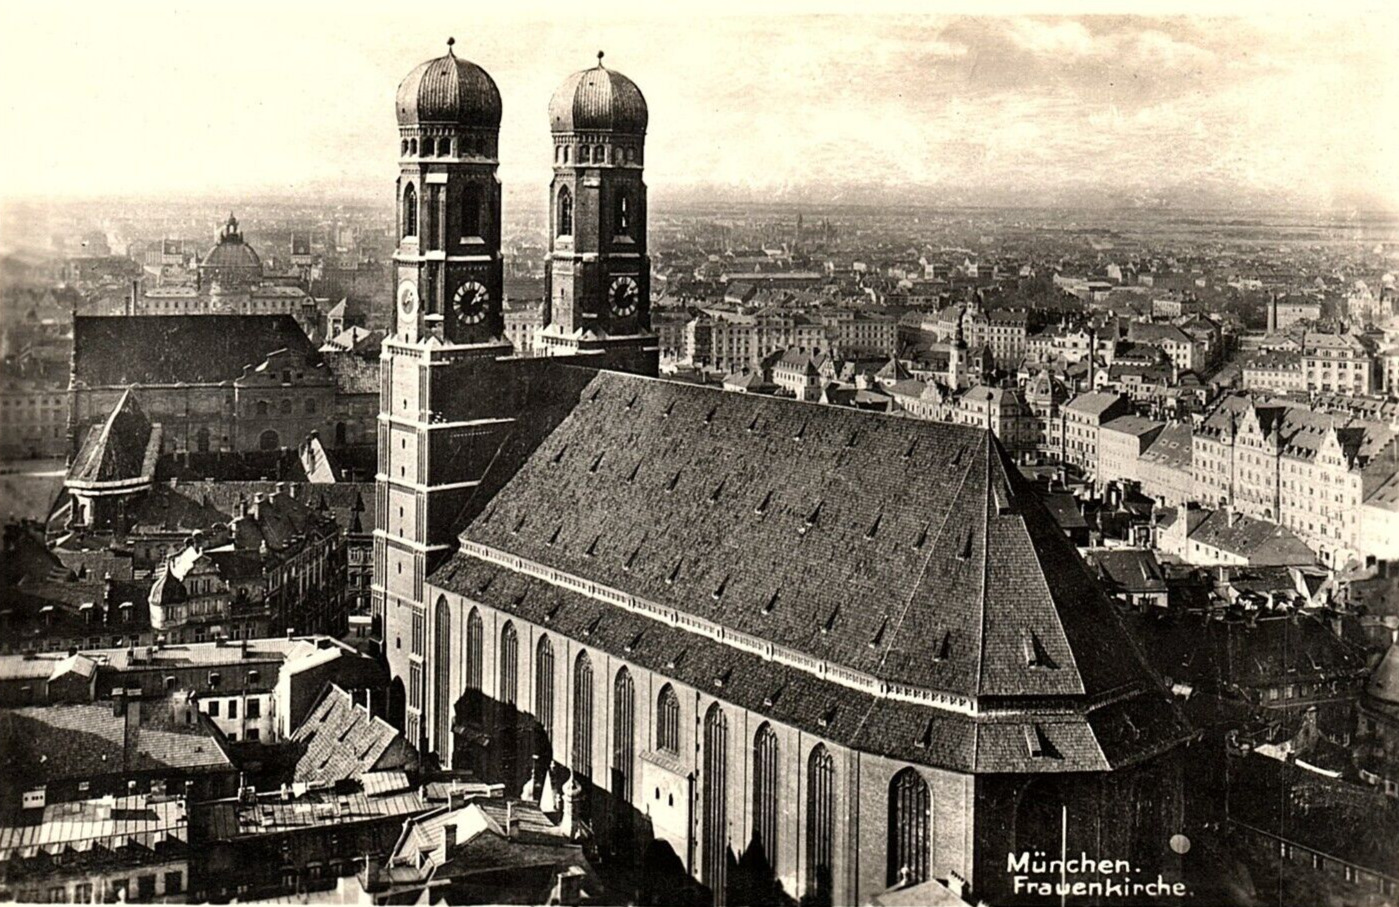 1930s MUNCHEN FRAUENKIRCHE CATHEDERAL GERMANY RPPC REAL PHOTO POSTCARD P666